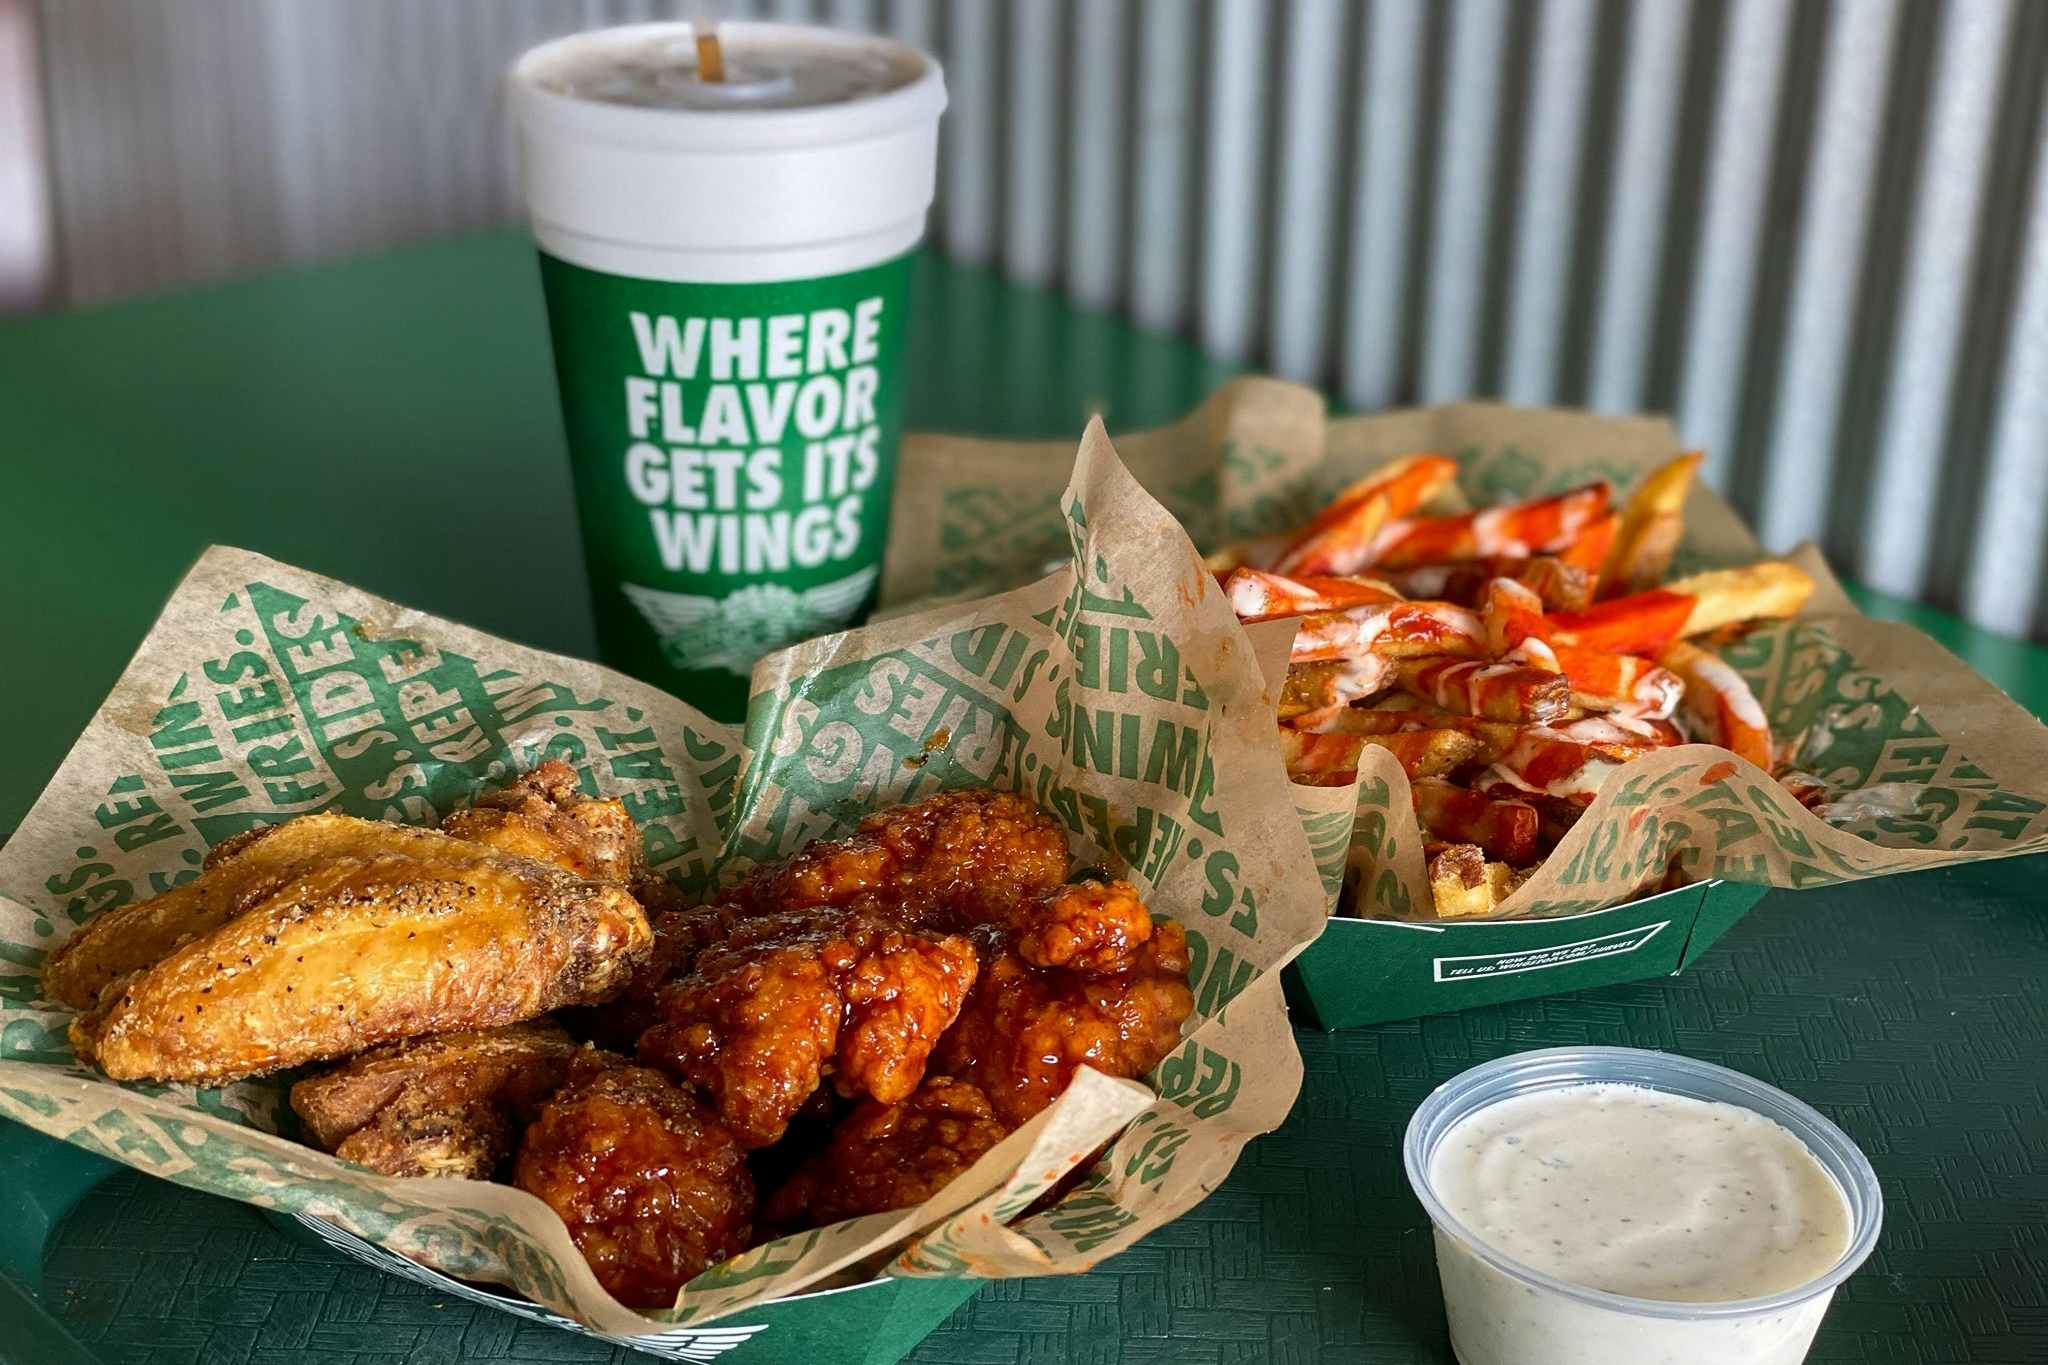 Wingstop wings, fries, and a drink sitting together on a table at Wingstop.